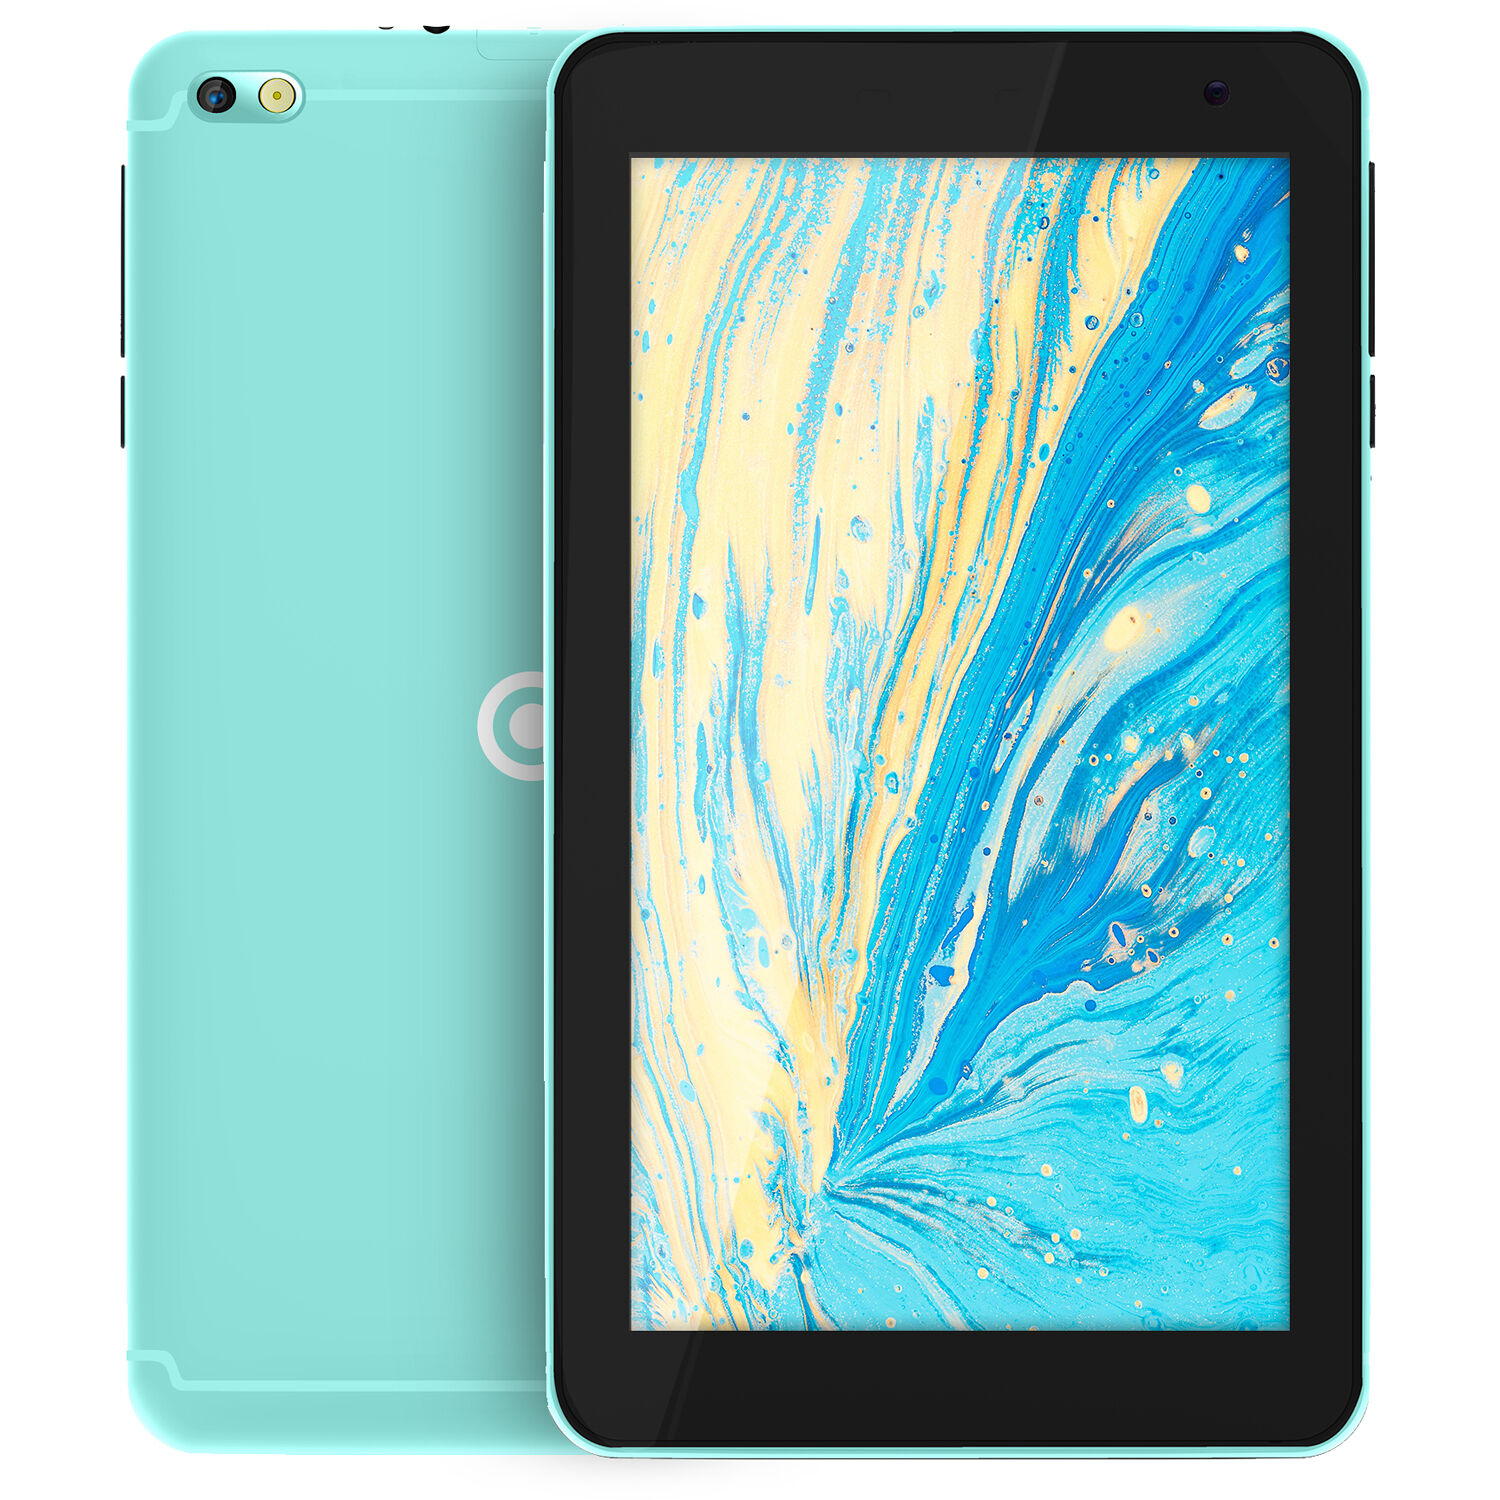 Core Innovations 7" CRTB7001 16GB Tablet (Teal)